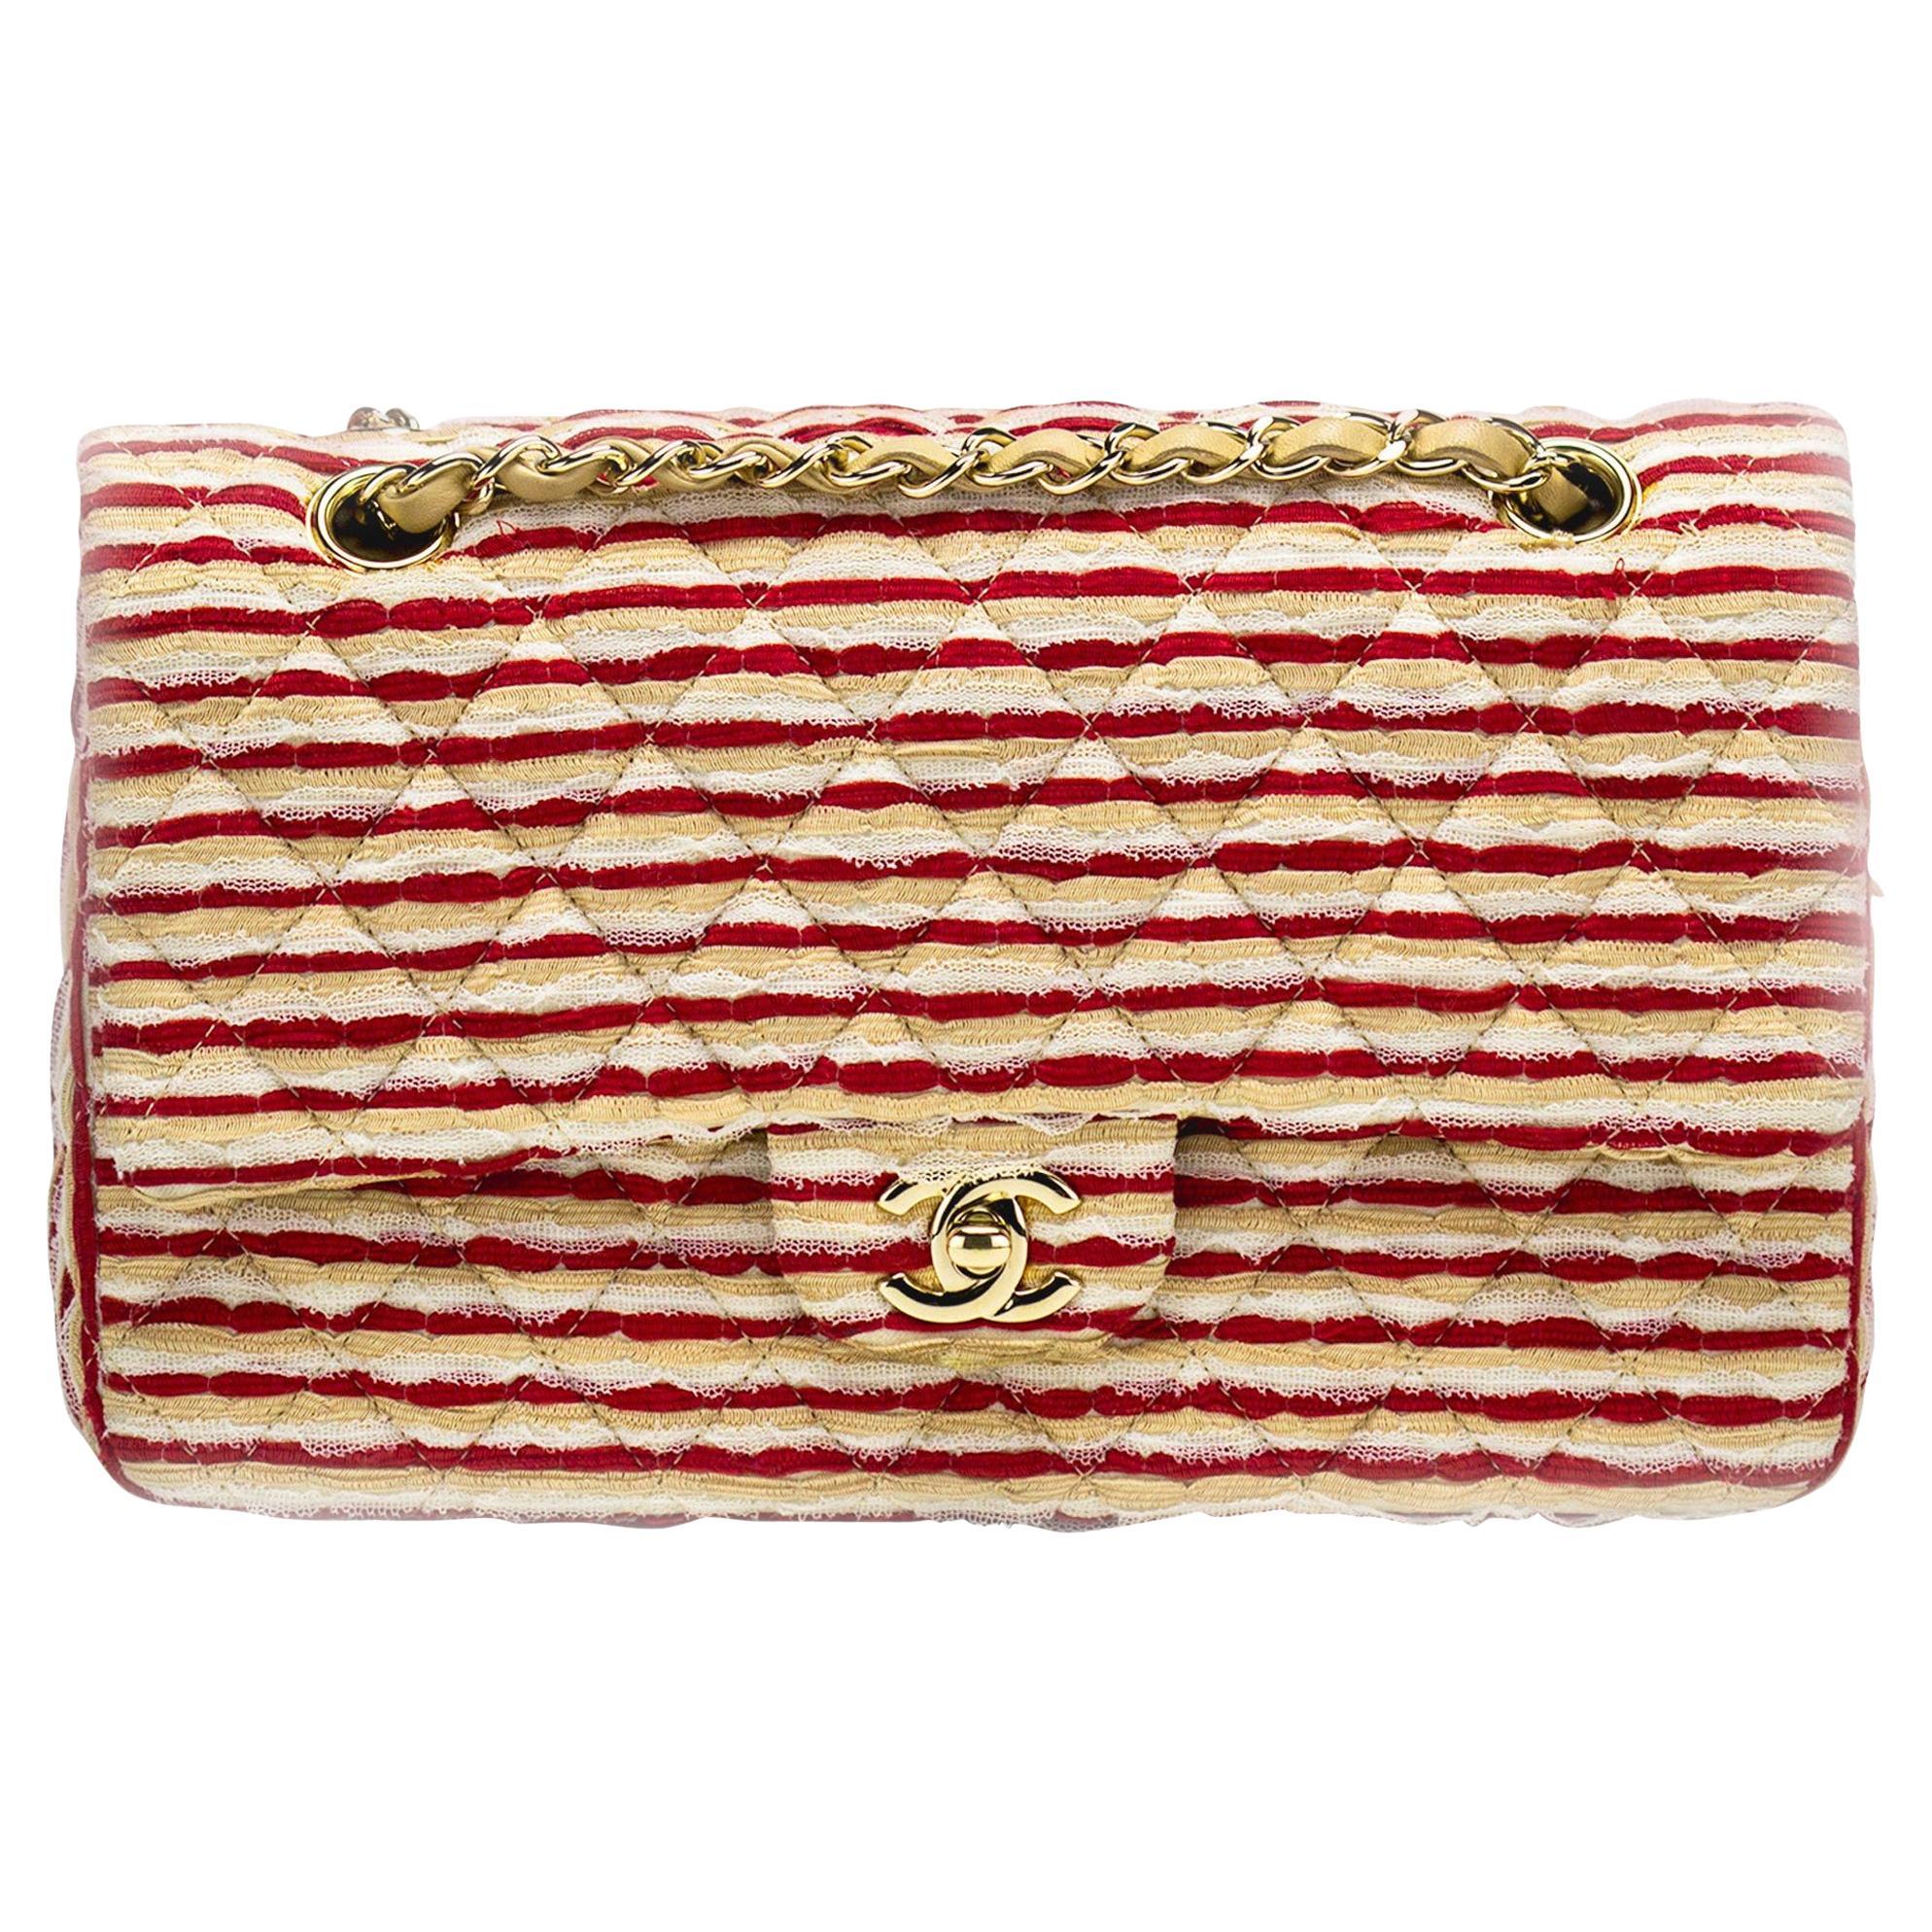 Chanel Medium Classic Vintage Striped Red and Beige Double Flap Bag 